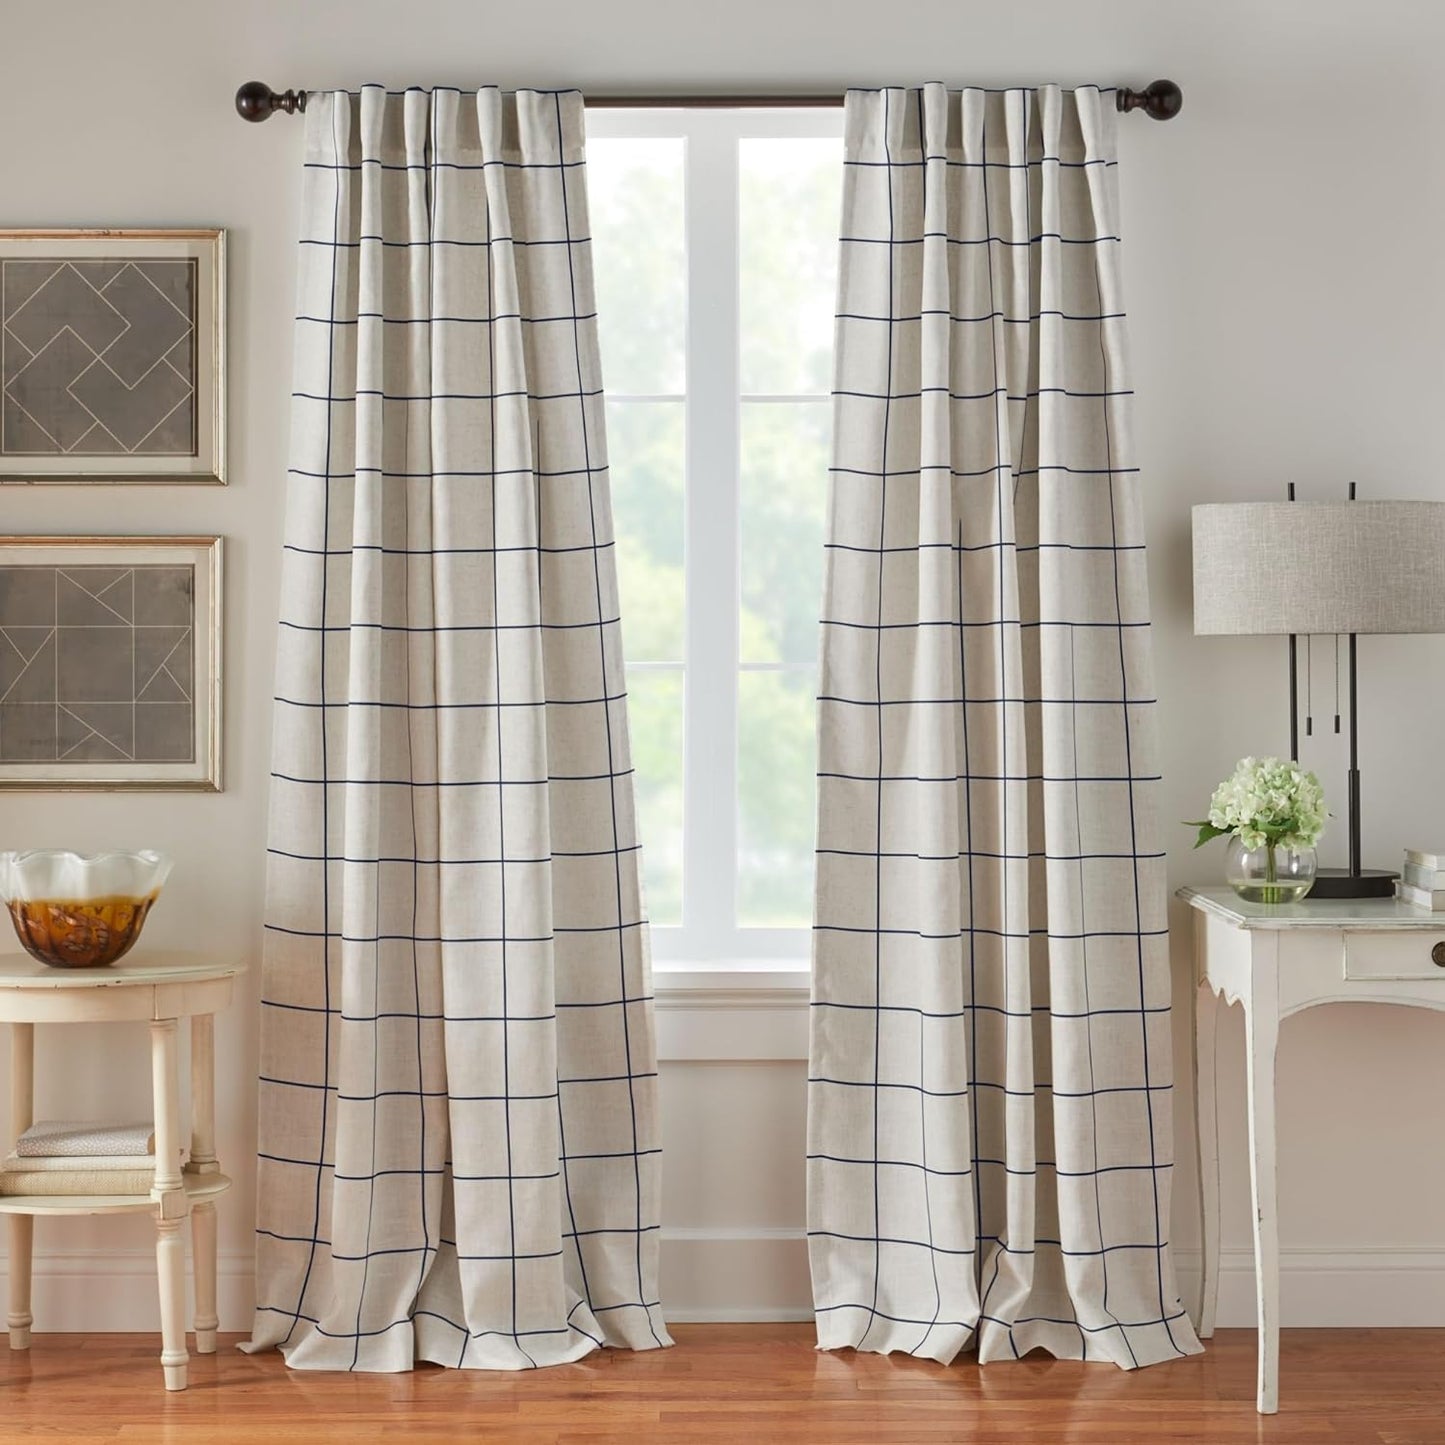 Elrene Home Fashions Brighton Windowpane Plaid Blackout Window Curtain, Living Room and Bedroom Drape with Rod Pocket Tabs, 52" X 95", Grey, 1 Panel  Elrene Home Fashions Indigo 52 In X 95 In 